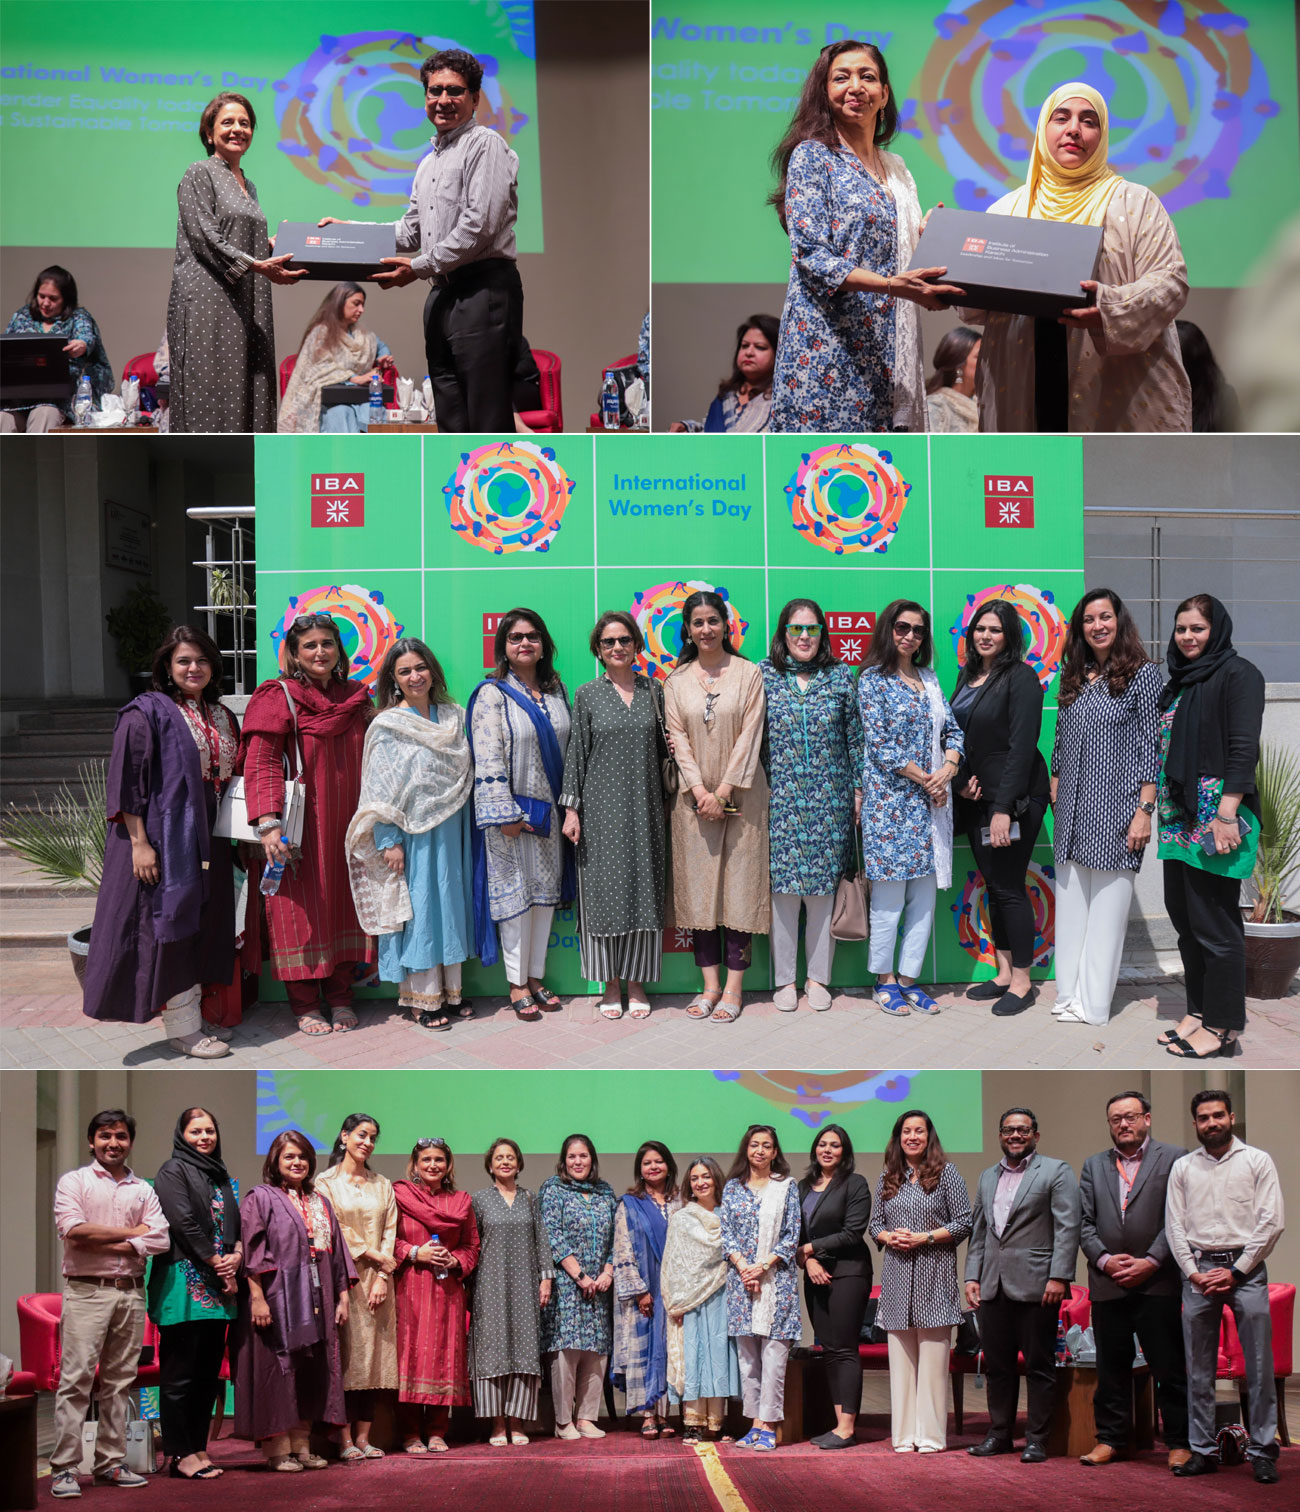 IBA Karachi organizes a panel discussion to commemorate International Women's Day